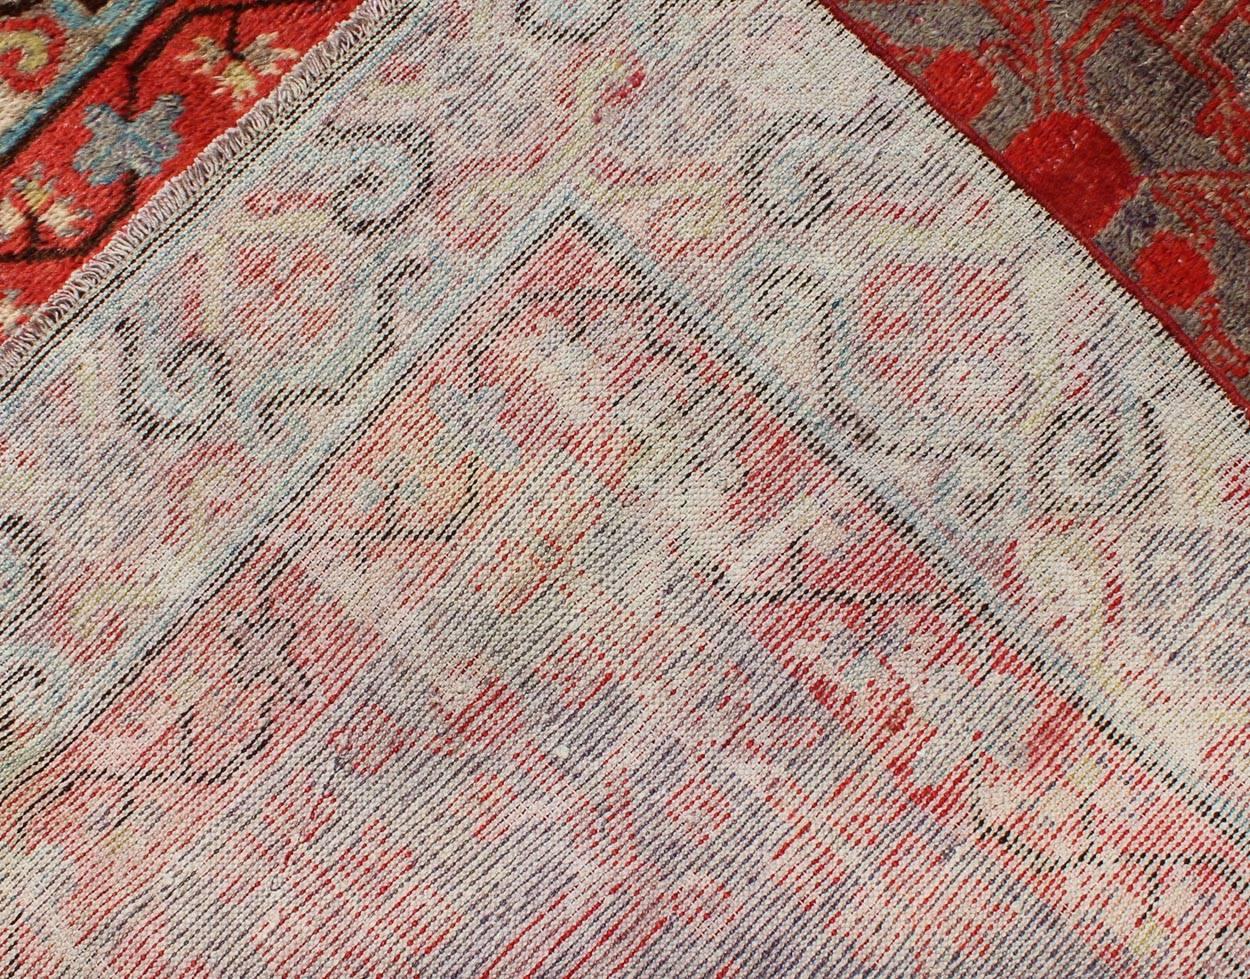 Early 20th Century Intricate Vintage Khotan Rug with Sub-Geometric Design in Reds and Light Blue For Sale